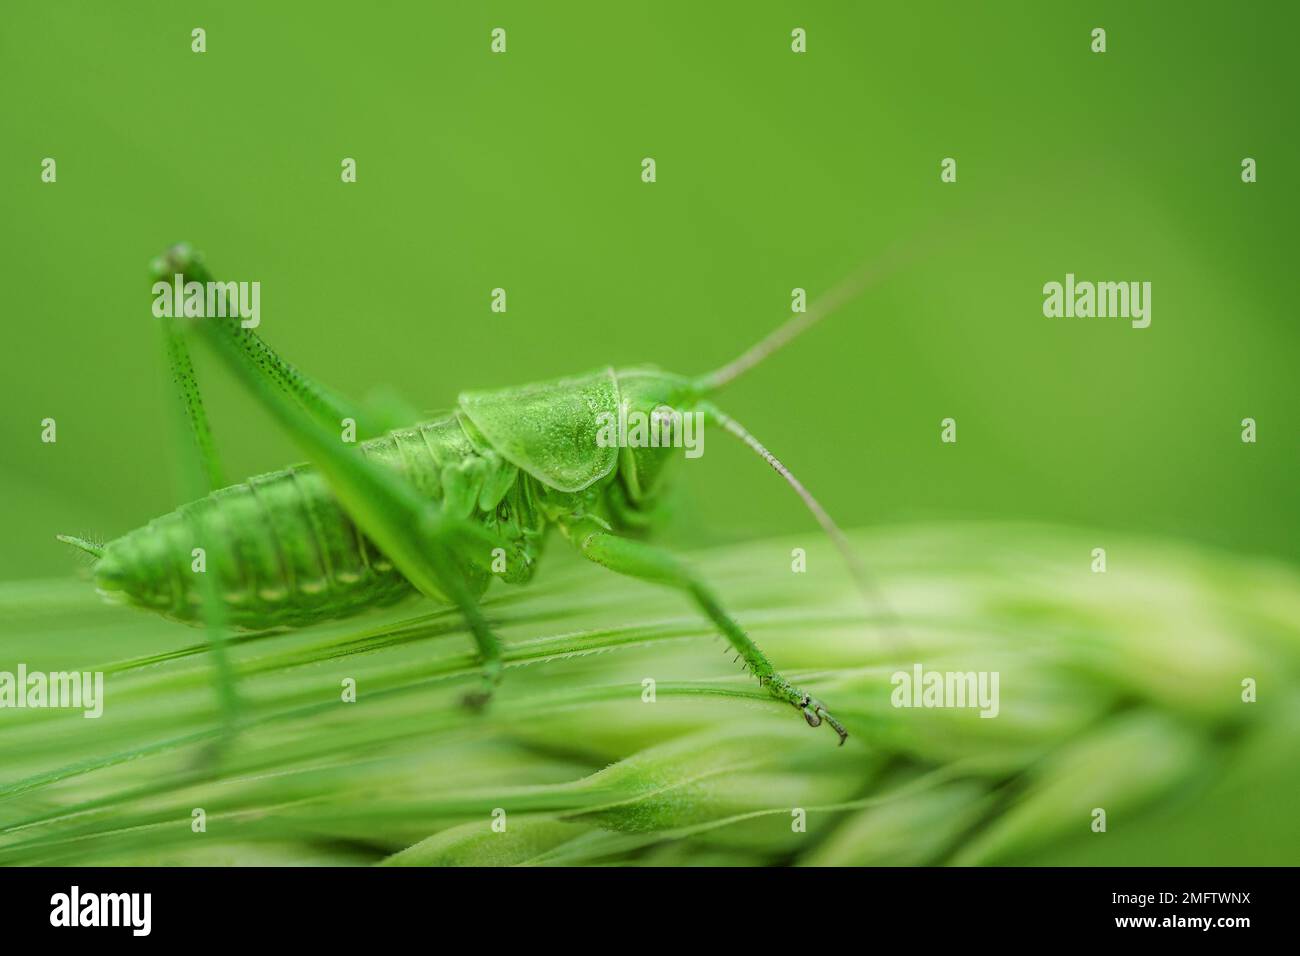 A green grasshopper is sitting on a green leaf. Grasshopper in nature. Stock Photo